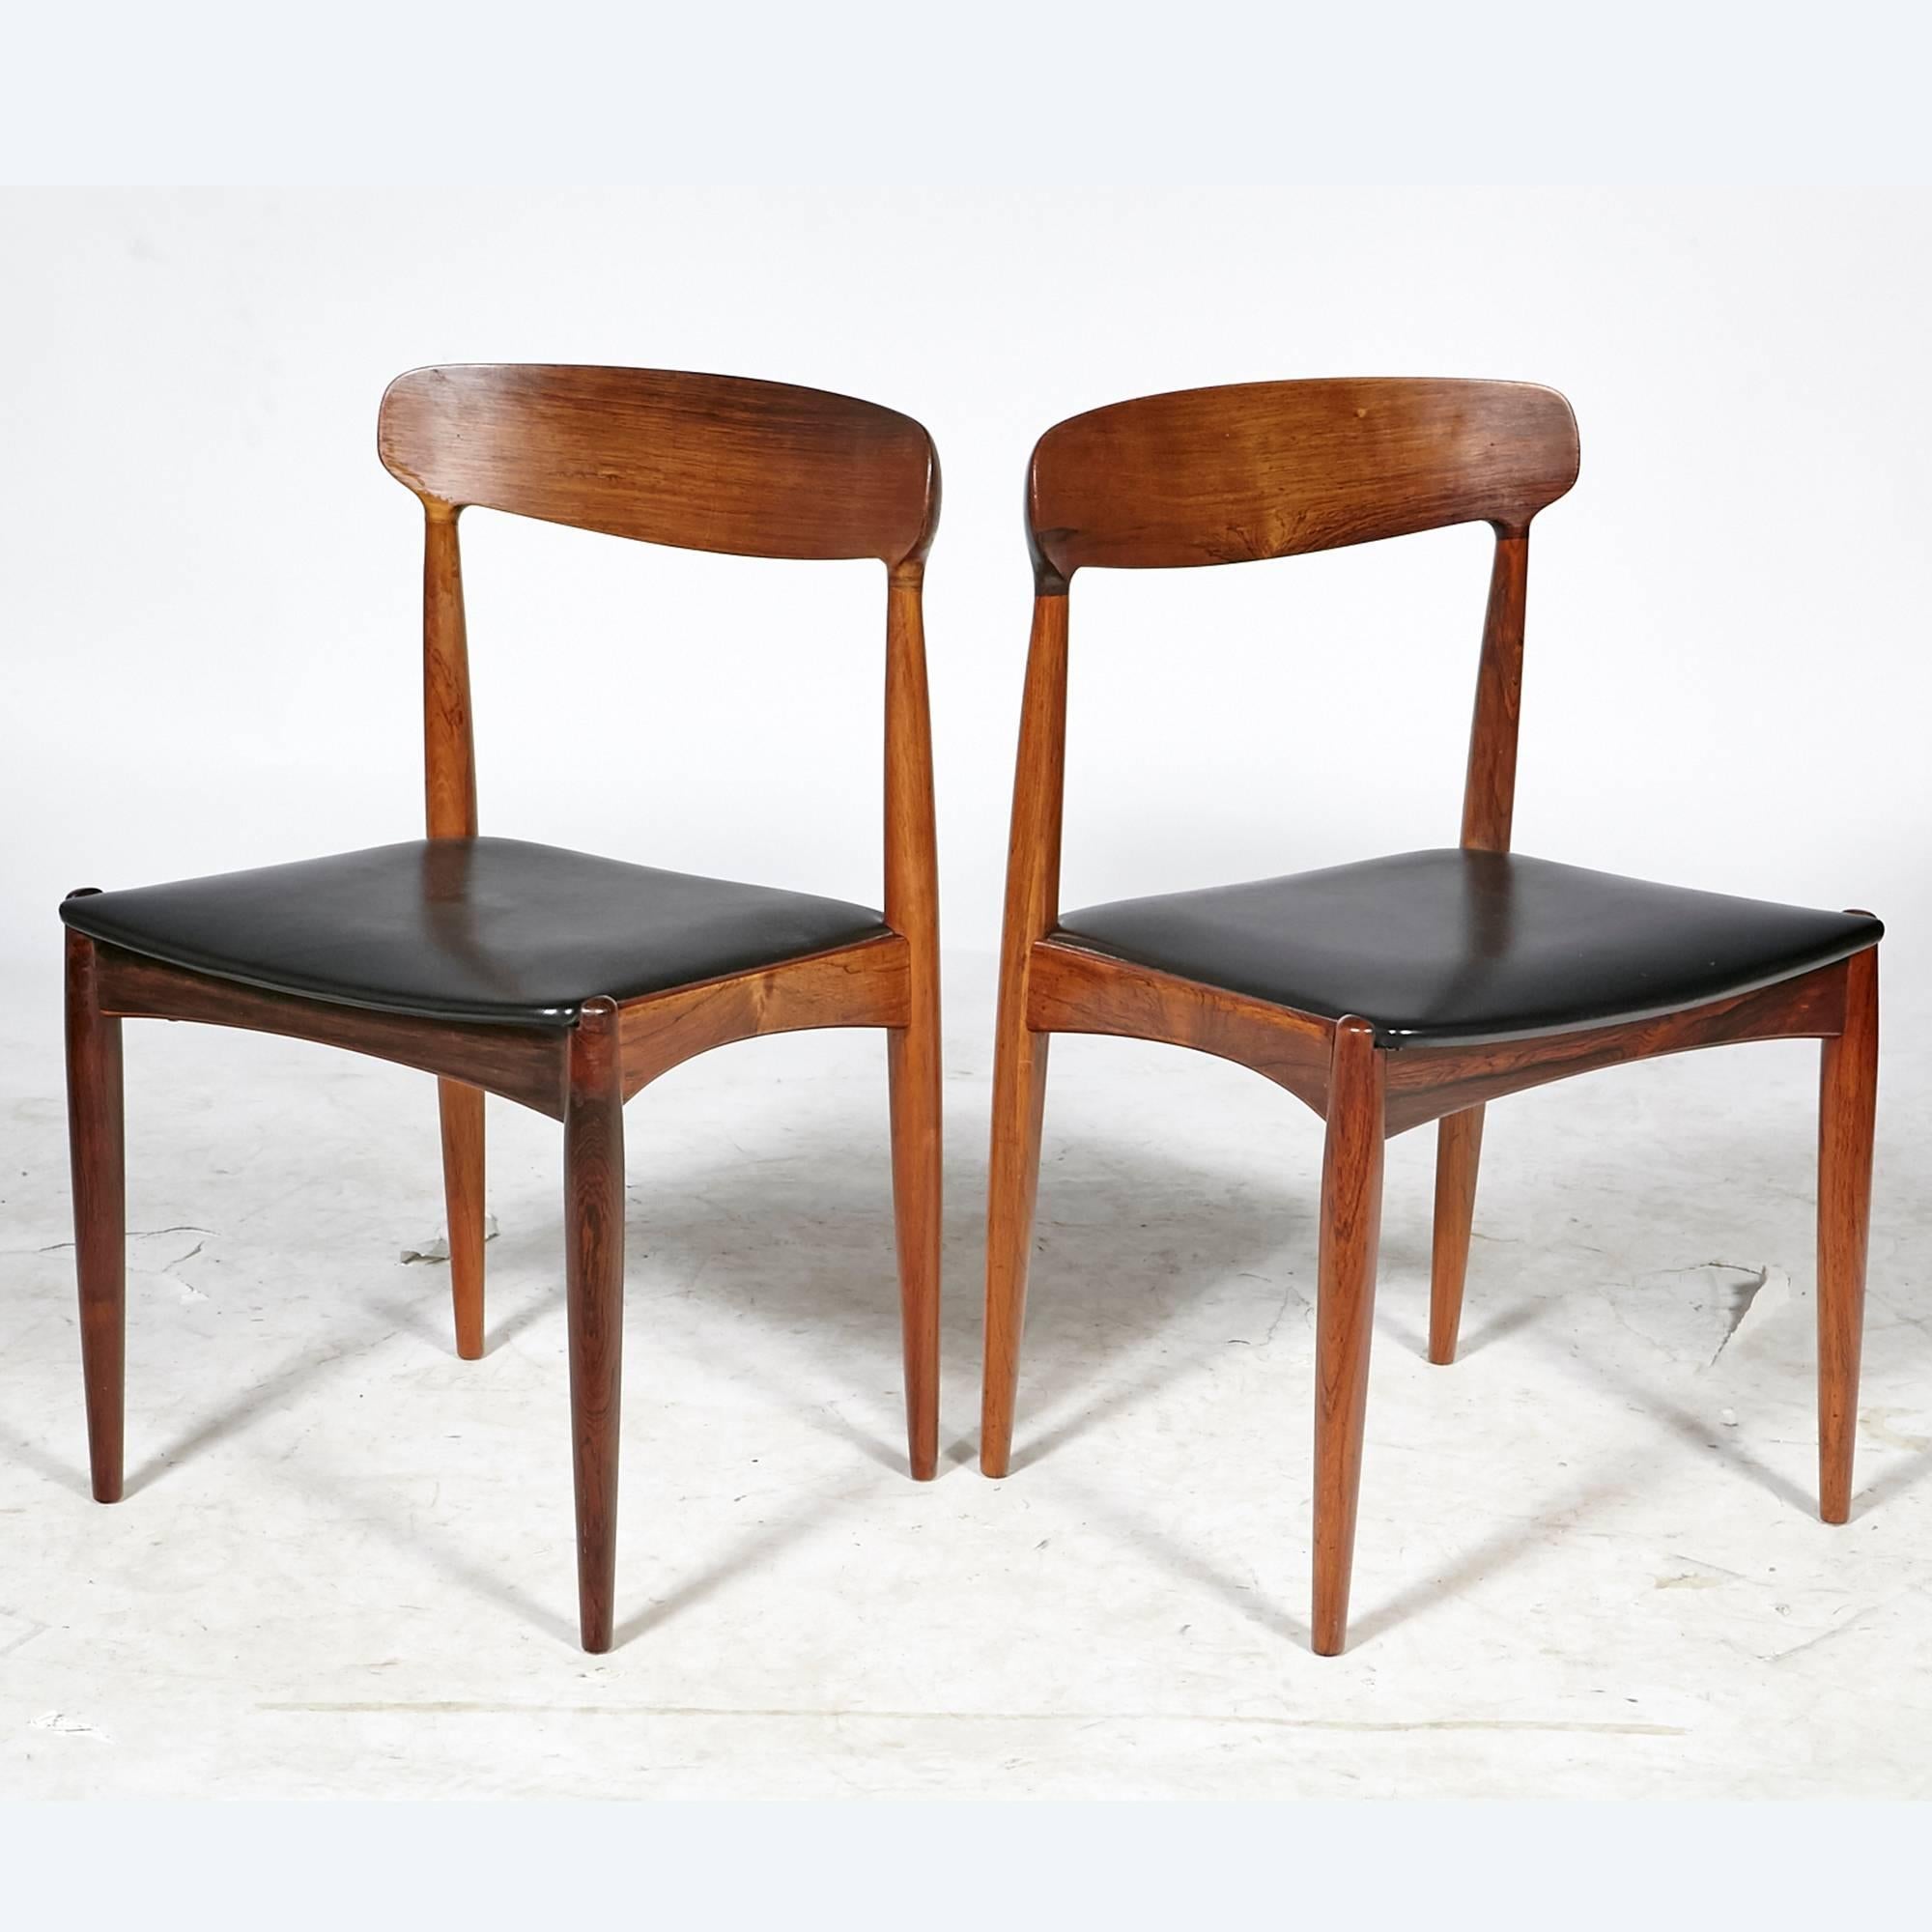 Scandinavian Modern Danish Rosewood Dining Chairs by Johannes Andersen for Uldum Mobler, 1960s For Sale